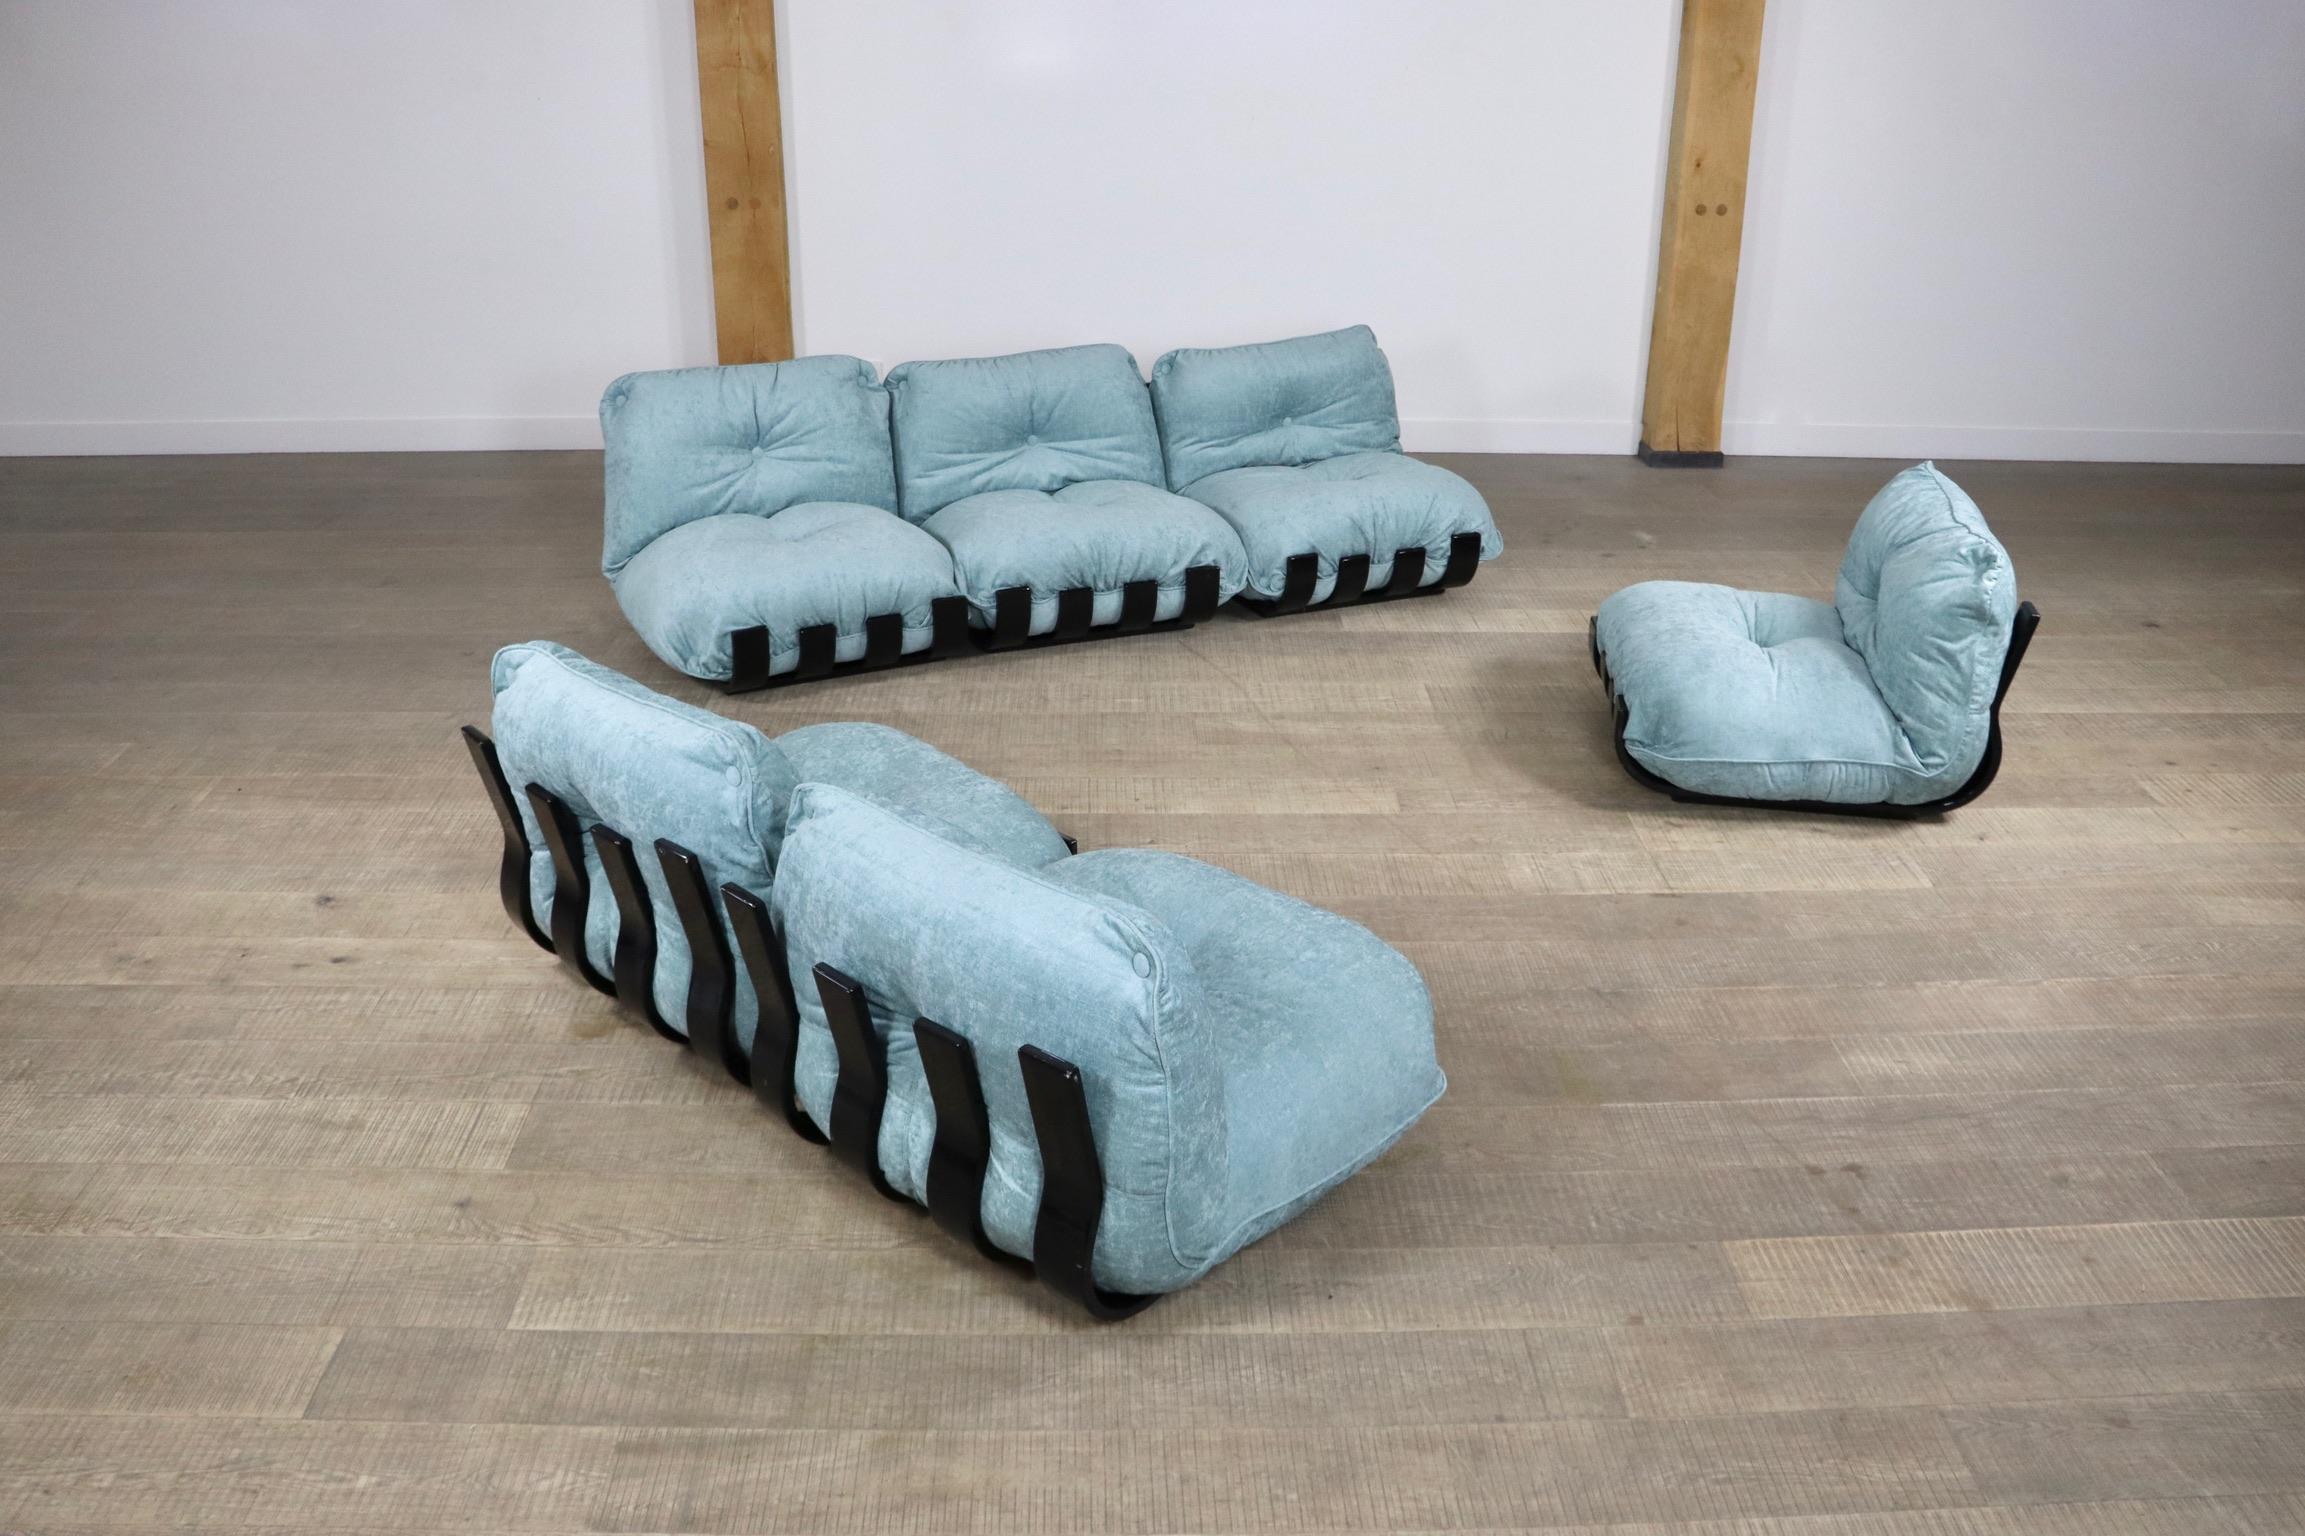 Sectional Gran Visir Sofa in Blue Velvet by Luciano Frigerio, Italy, 1970s For Sale 6